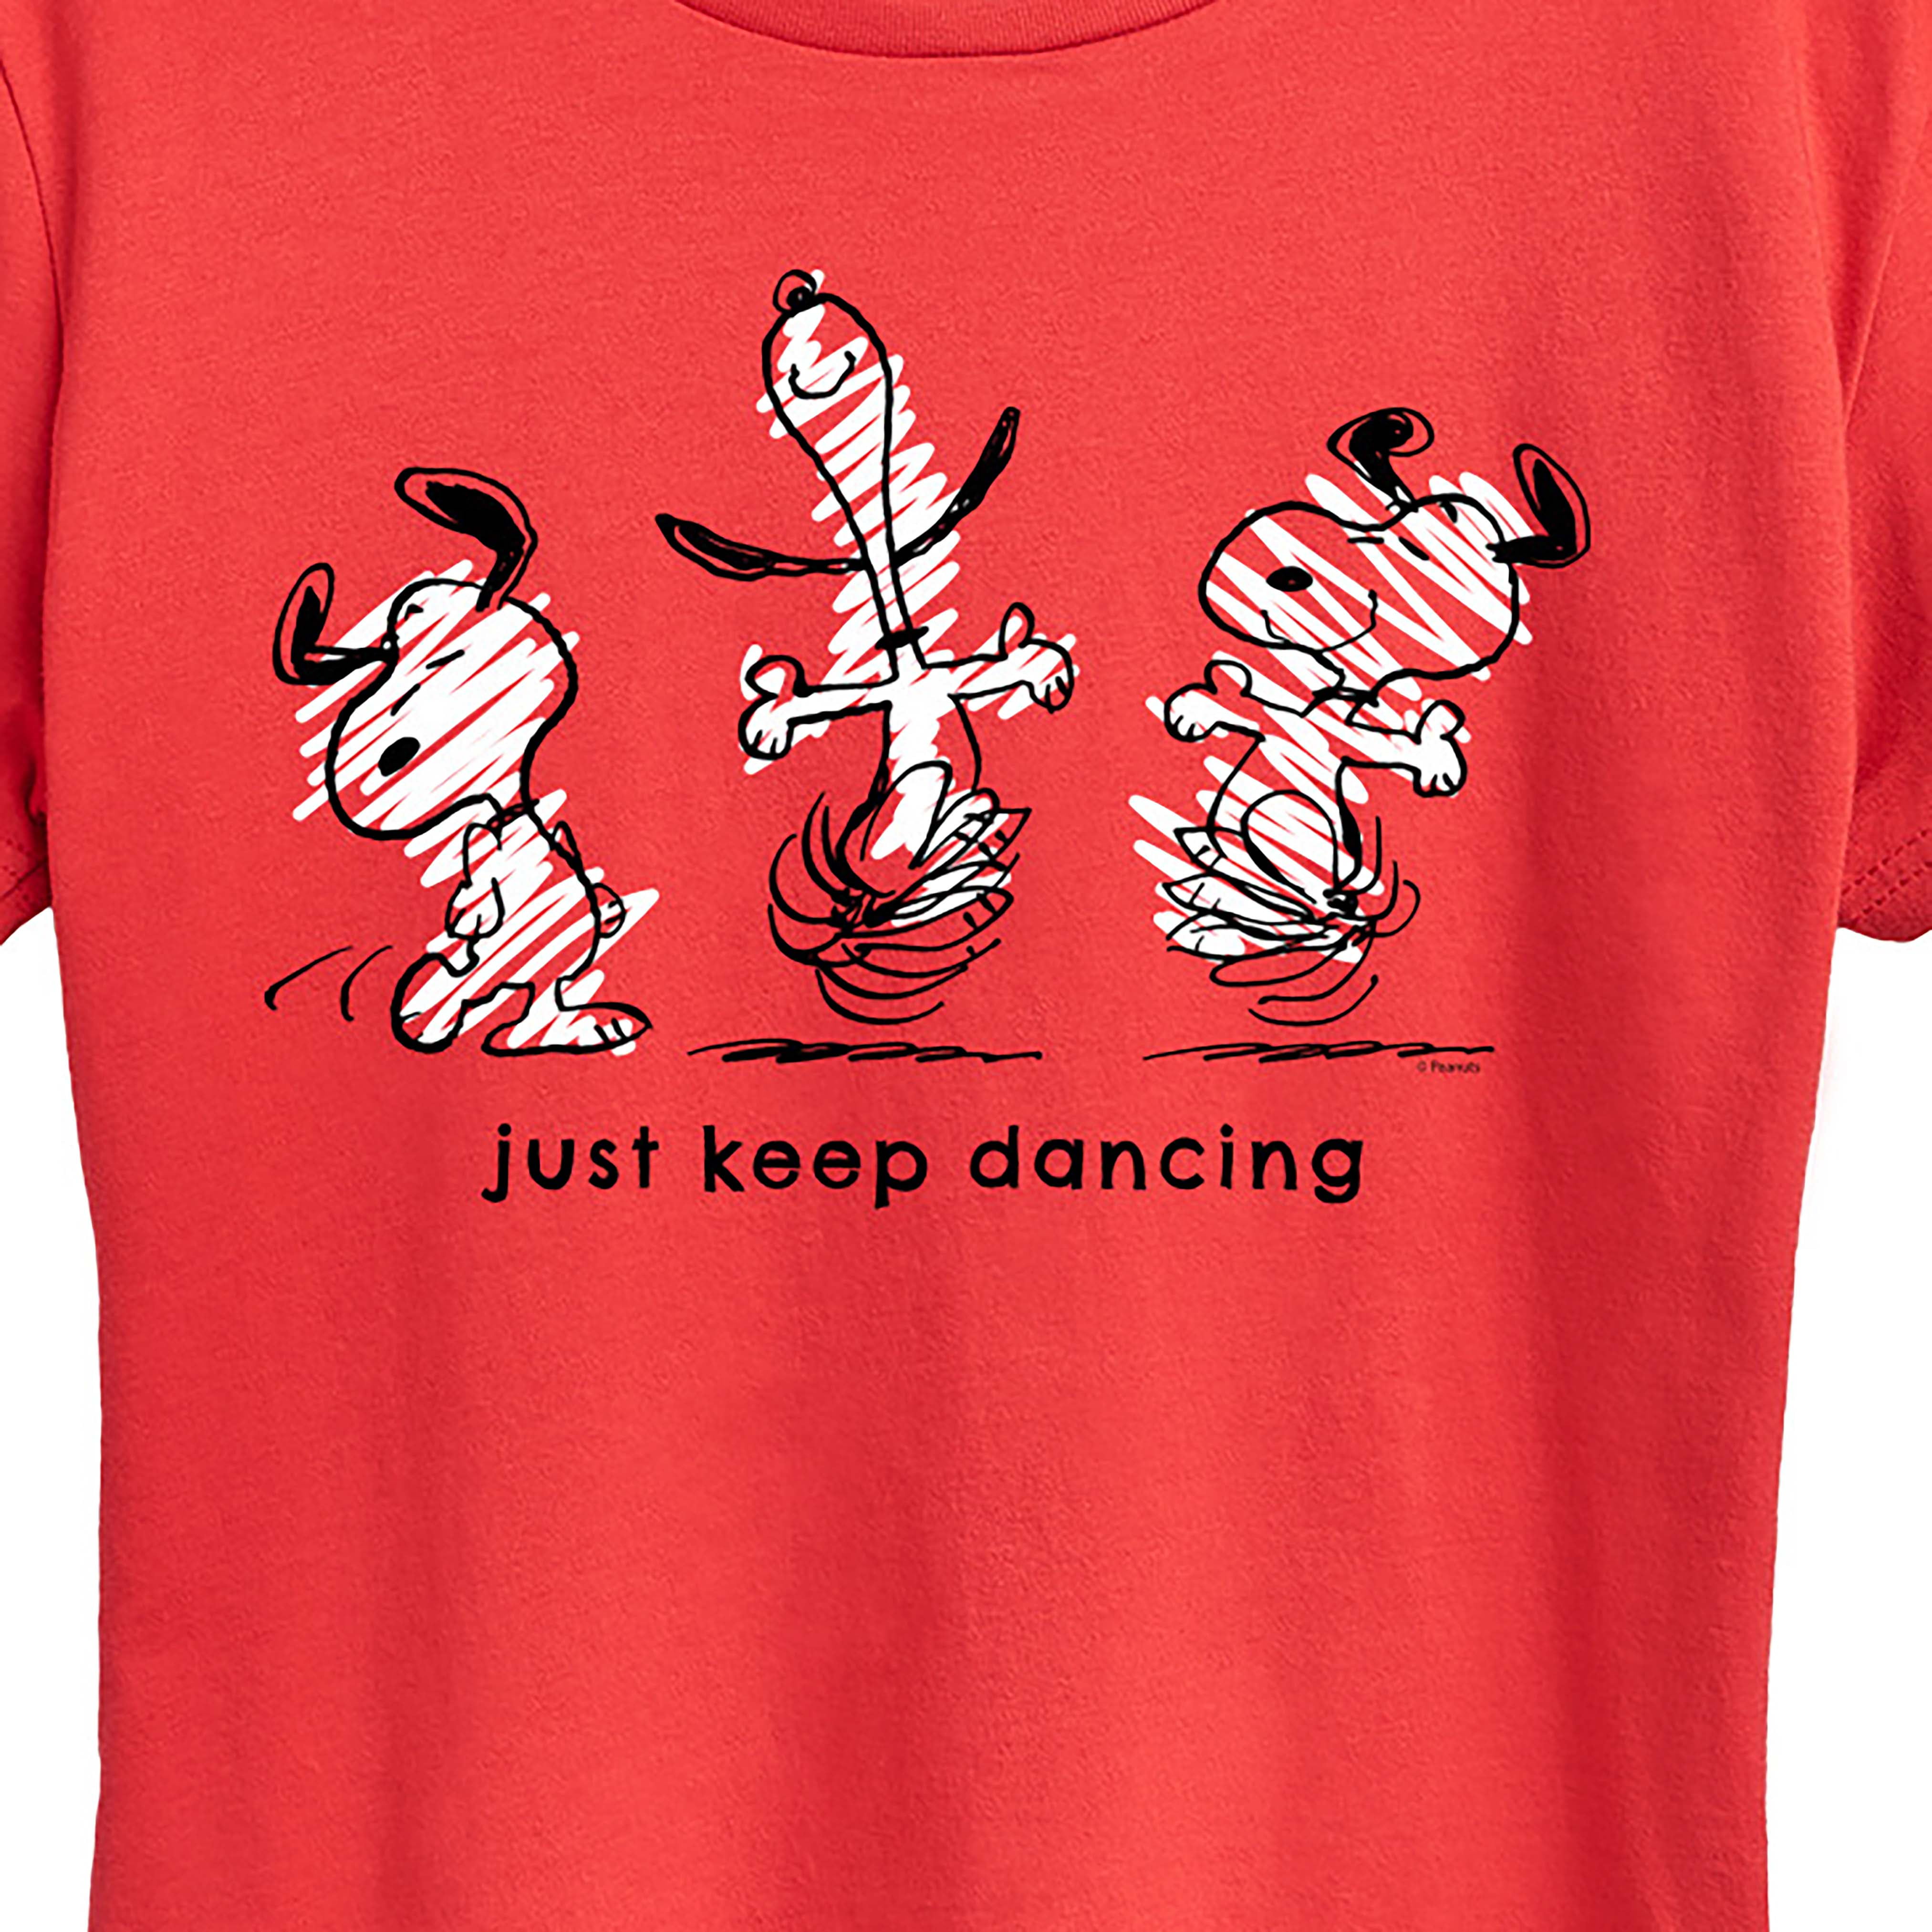 Peanuts - Snoopy Just Keep Dancing - Women\'s Short Sleeve Graphic T-Shirt | T-Shirts